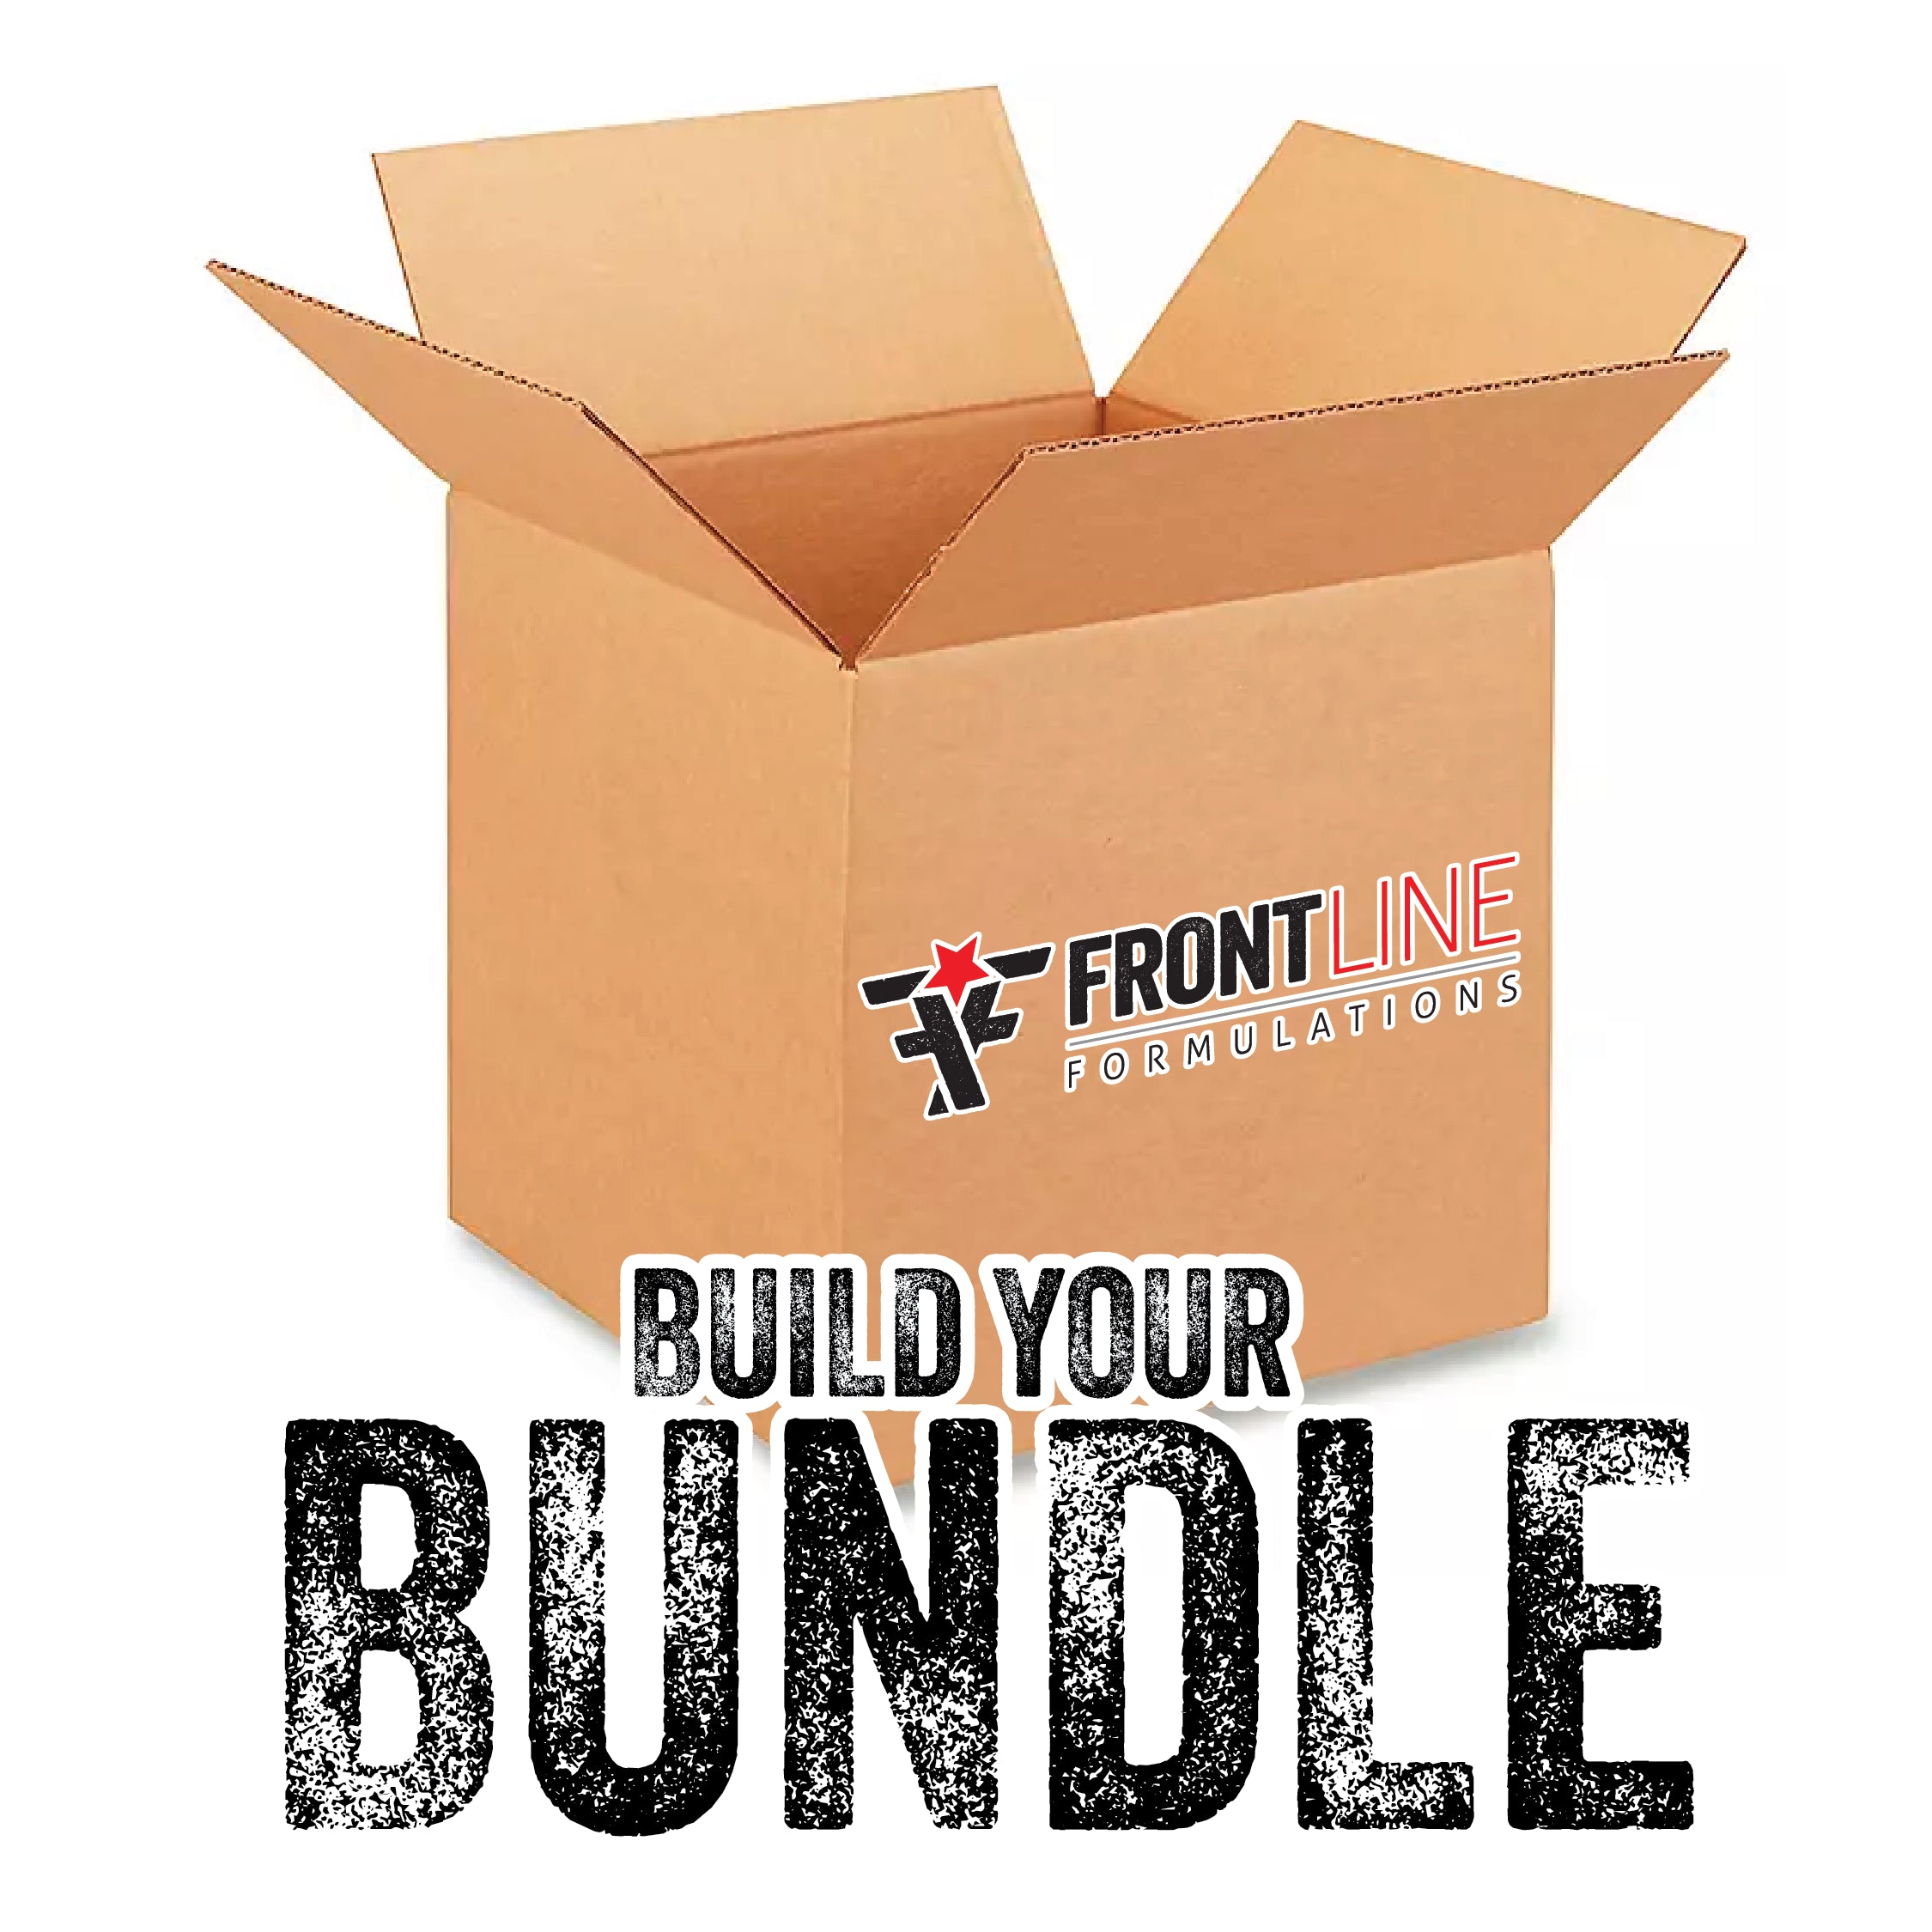 Build Your Bundle .mce-content-body .bundle-builder-customer-text { display: none } .shopify-section .bundle-bundler-admin-text { display: none } Do not add this product to your cart. Please visit the bundle page to edit. This is a dummy product and must